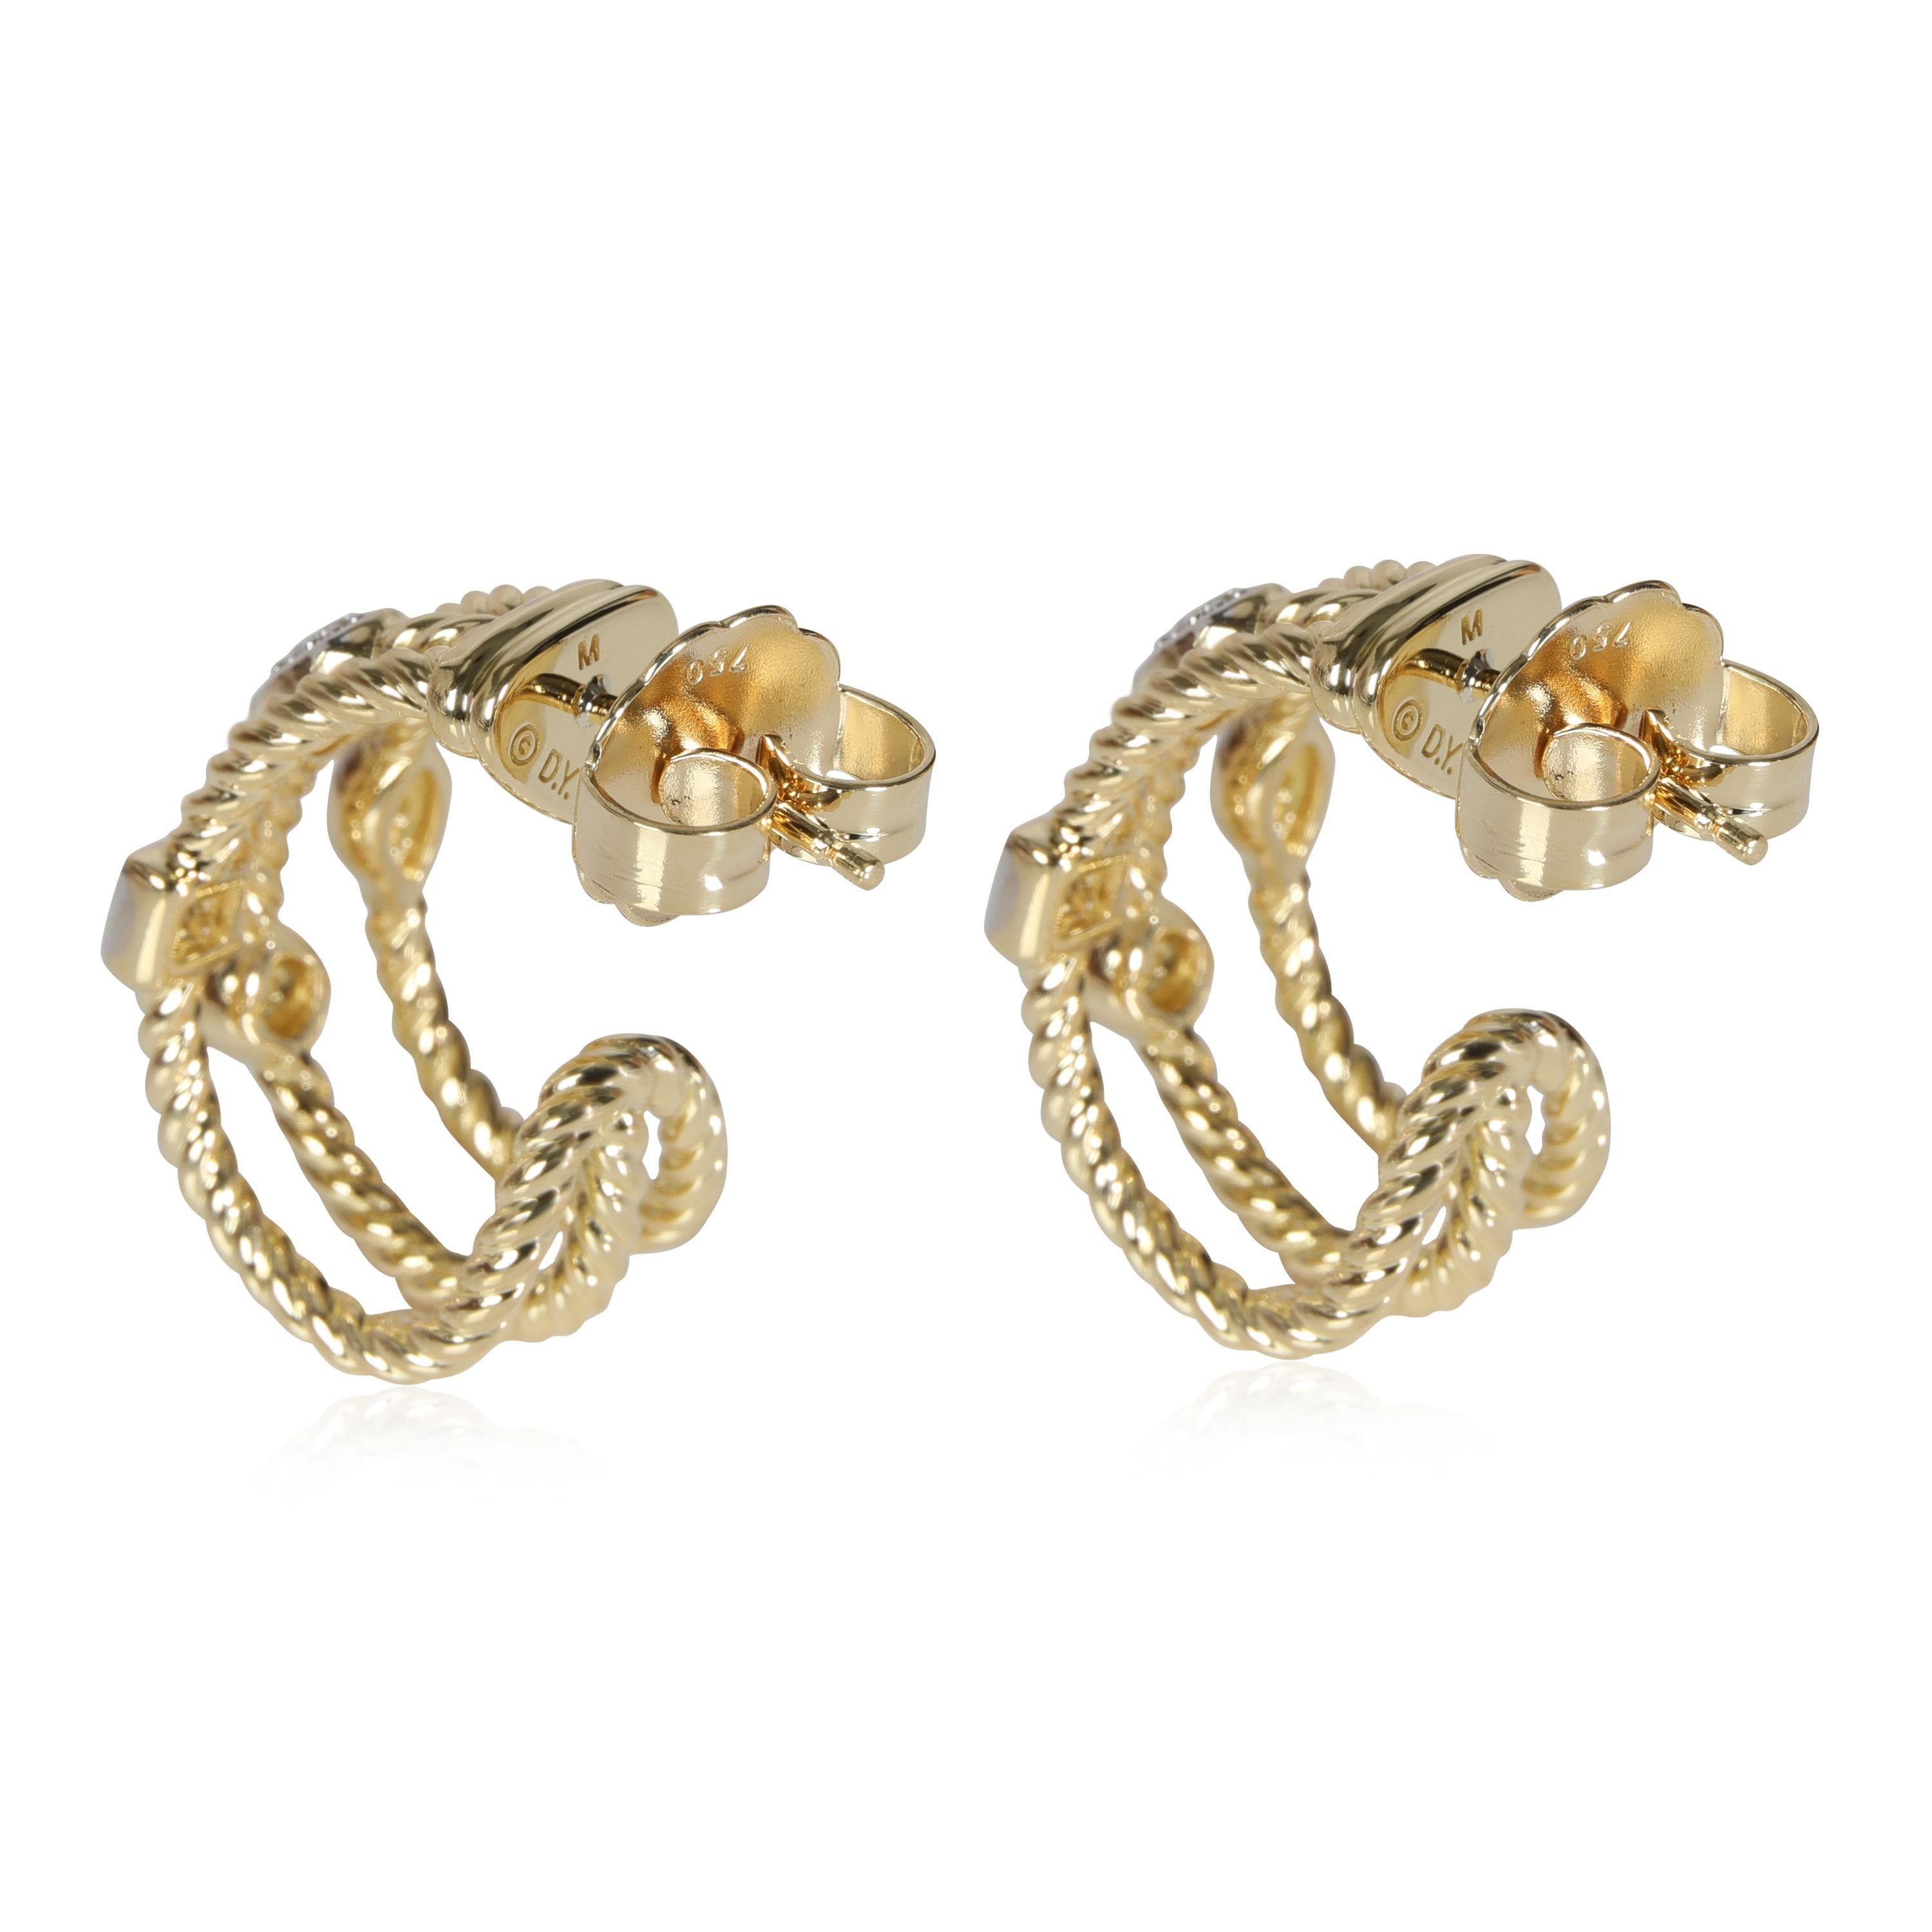 David Yurman Confetti Hoop Earrings in 18k Yellow Gold 0.15 CTW

PRIMARY DETAILS
SKU: 115048
Listing Title: David Yurman Confetti Hoop Earrings in 18k Yellow Gold 0.15 CTW
Condition Description: Retails for 4000 USD. In excellent condition and